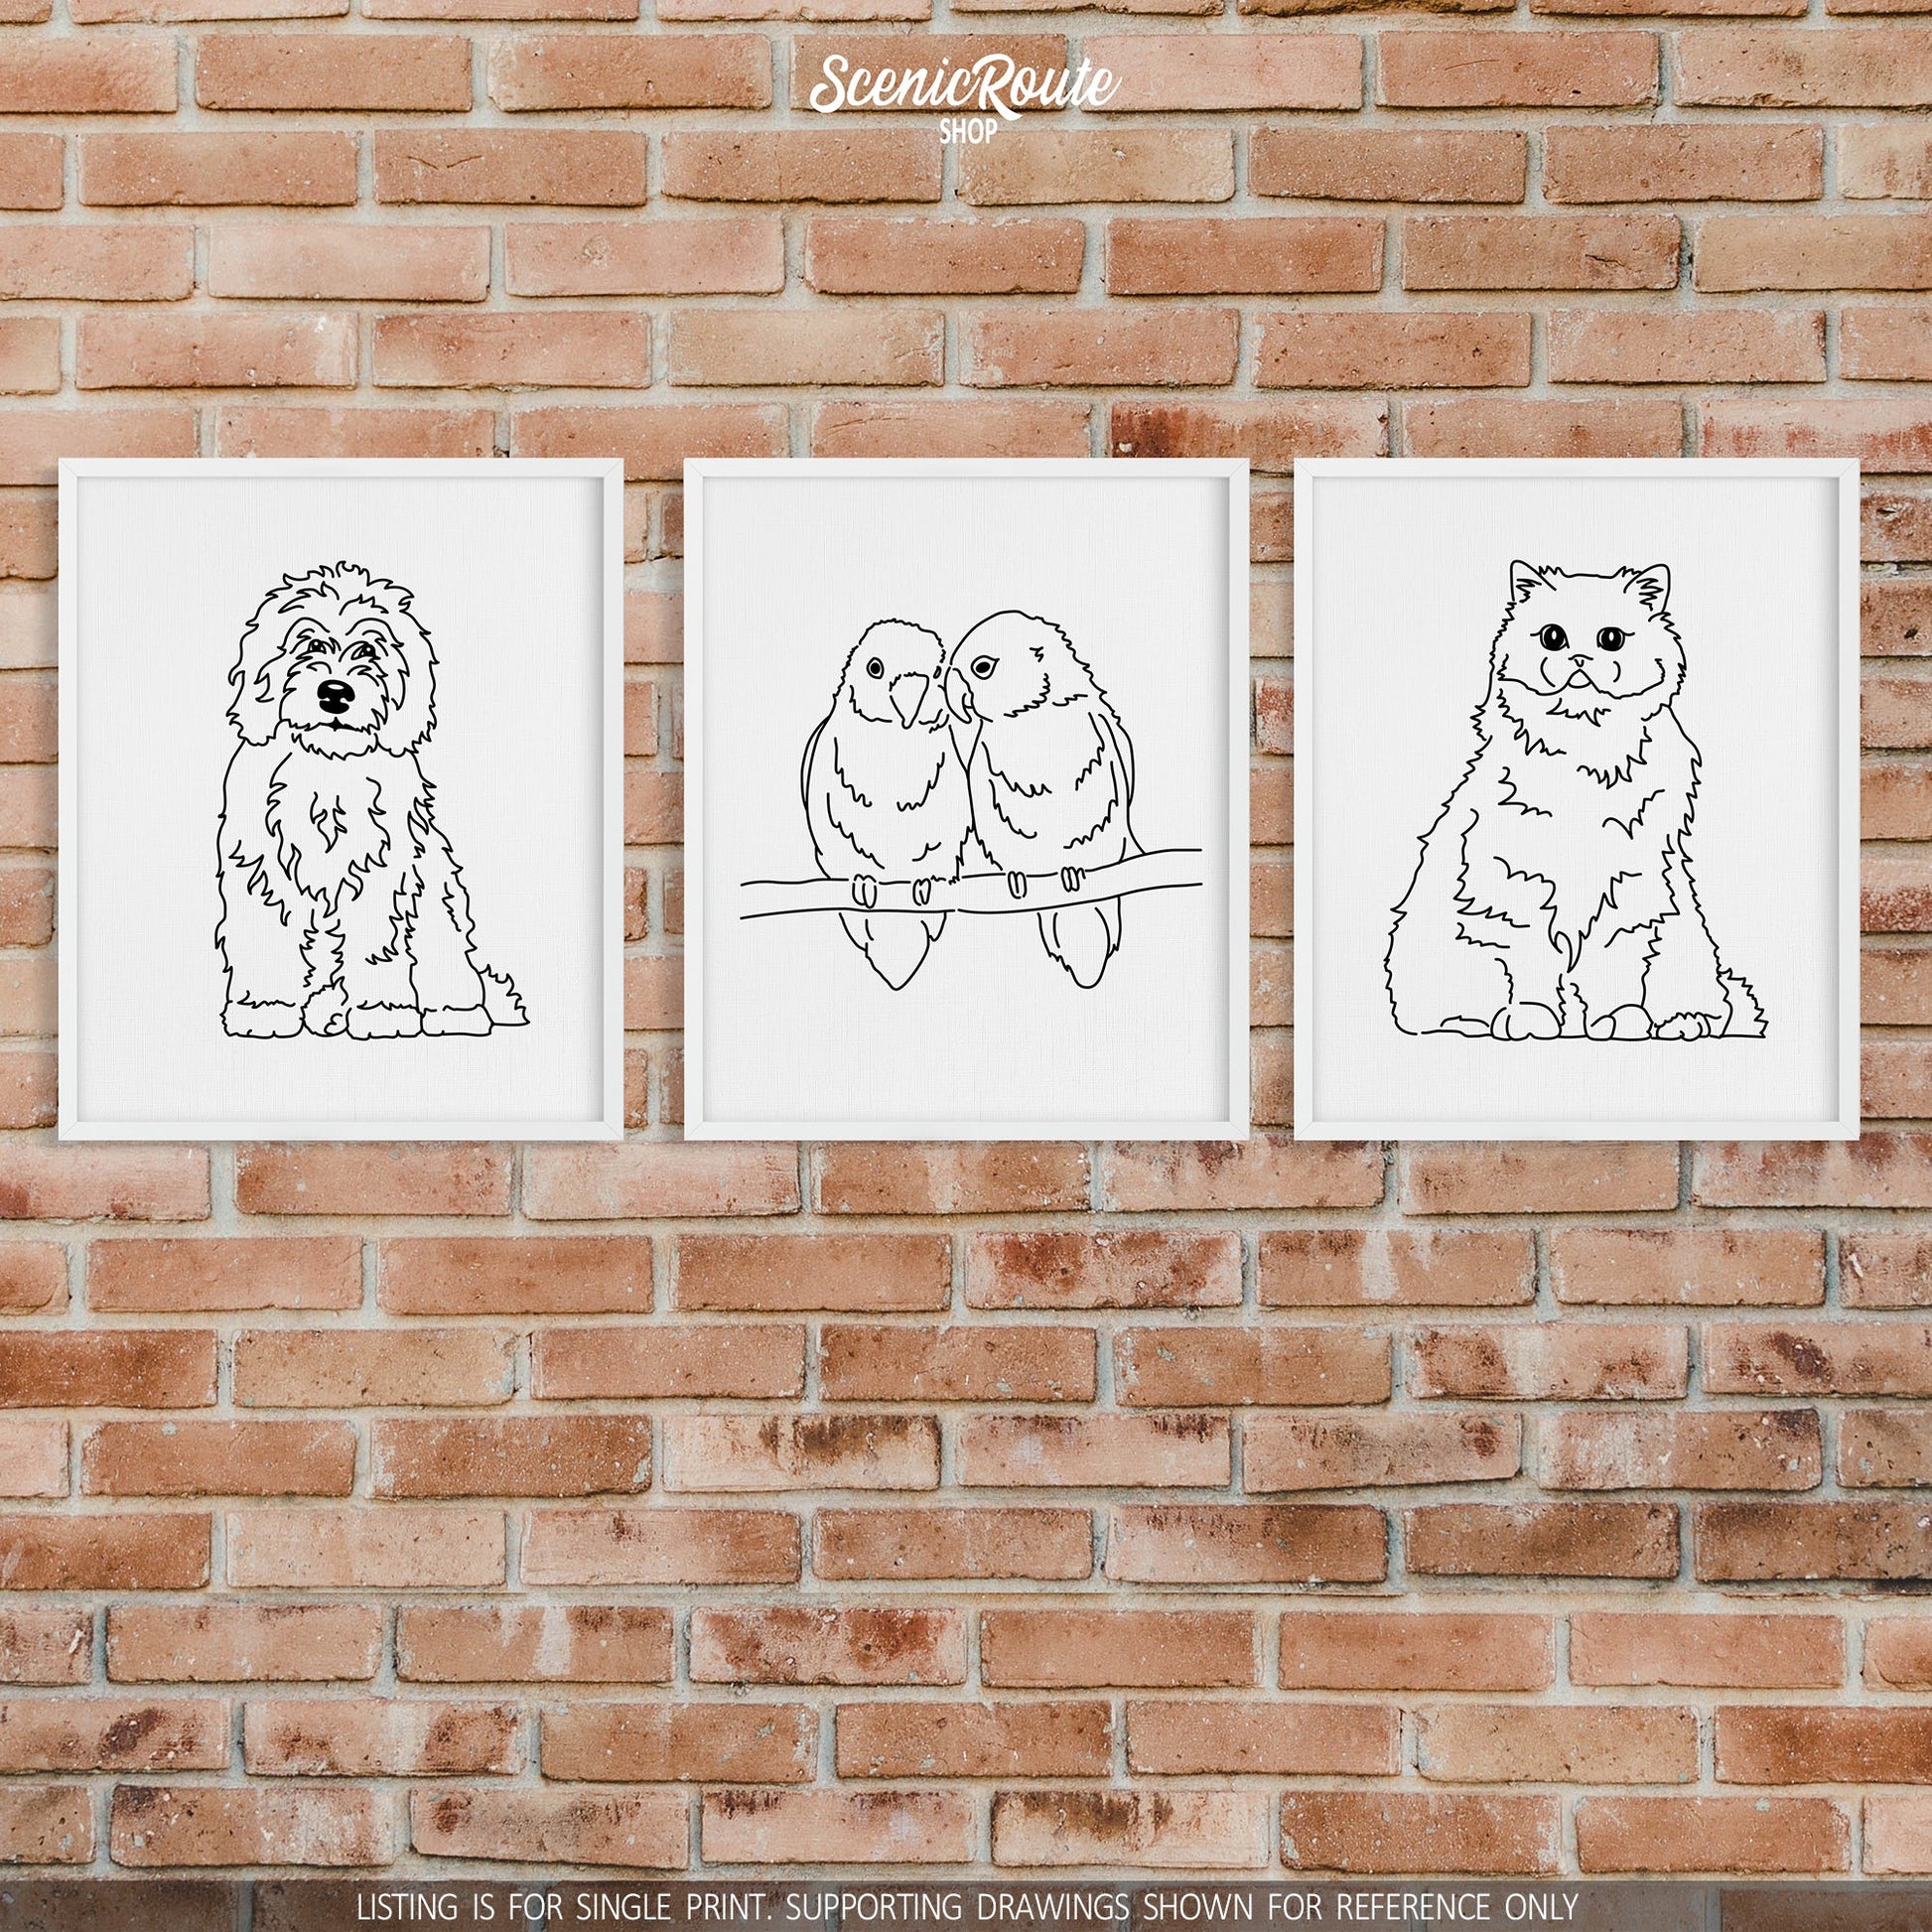 A group of three framed drawings on a brick wall. The line art drawings include a Sheepadoodle dog, Love Birds, and a Persian cat